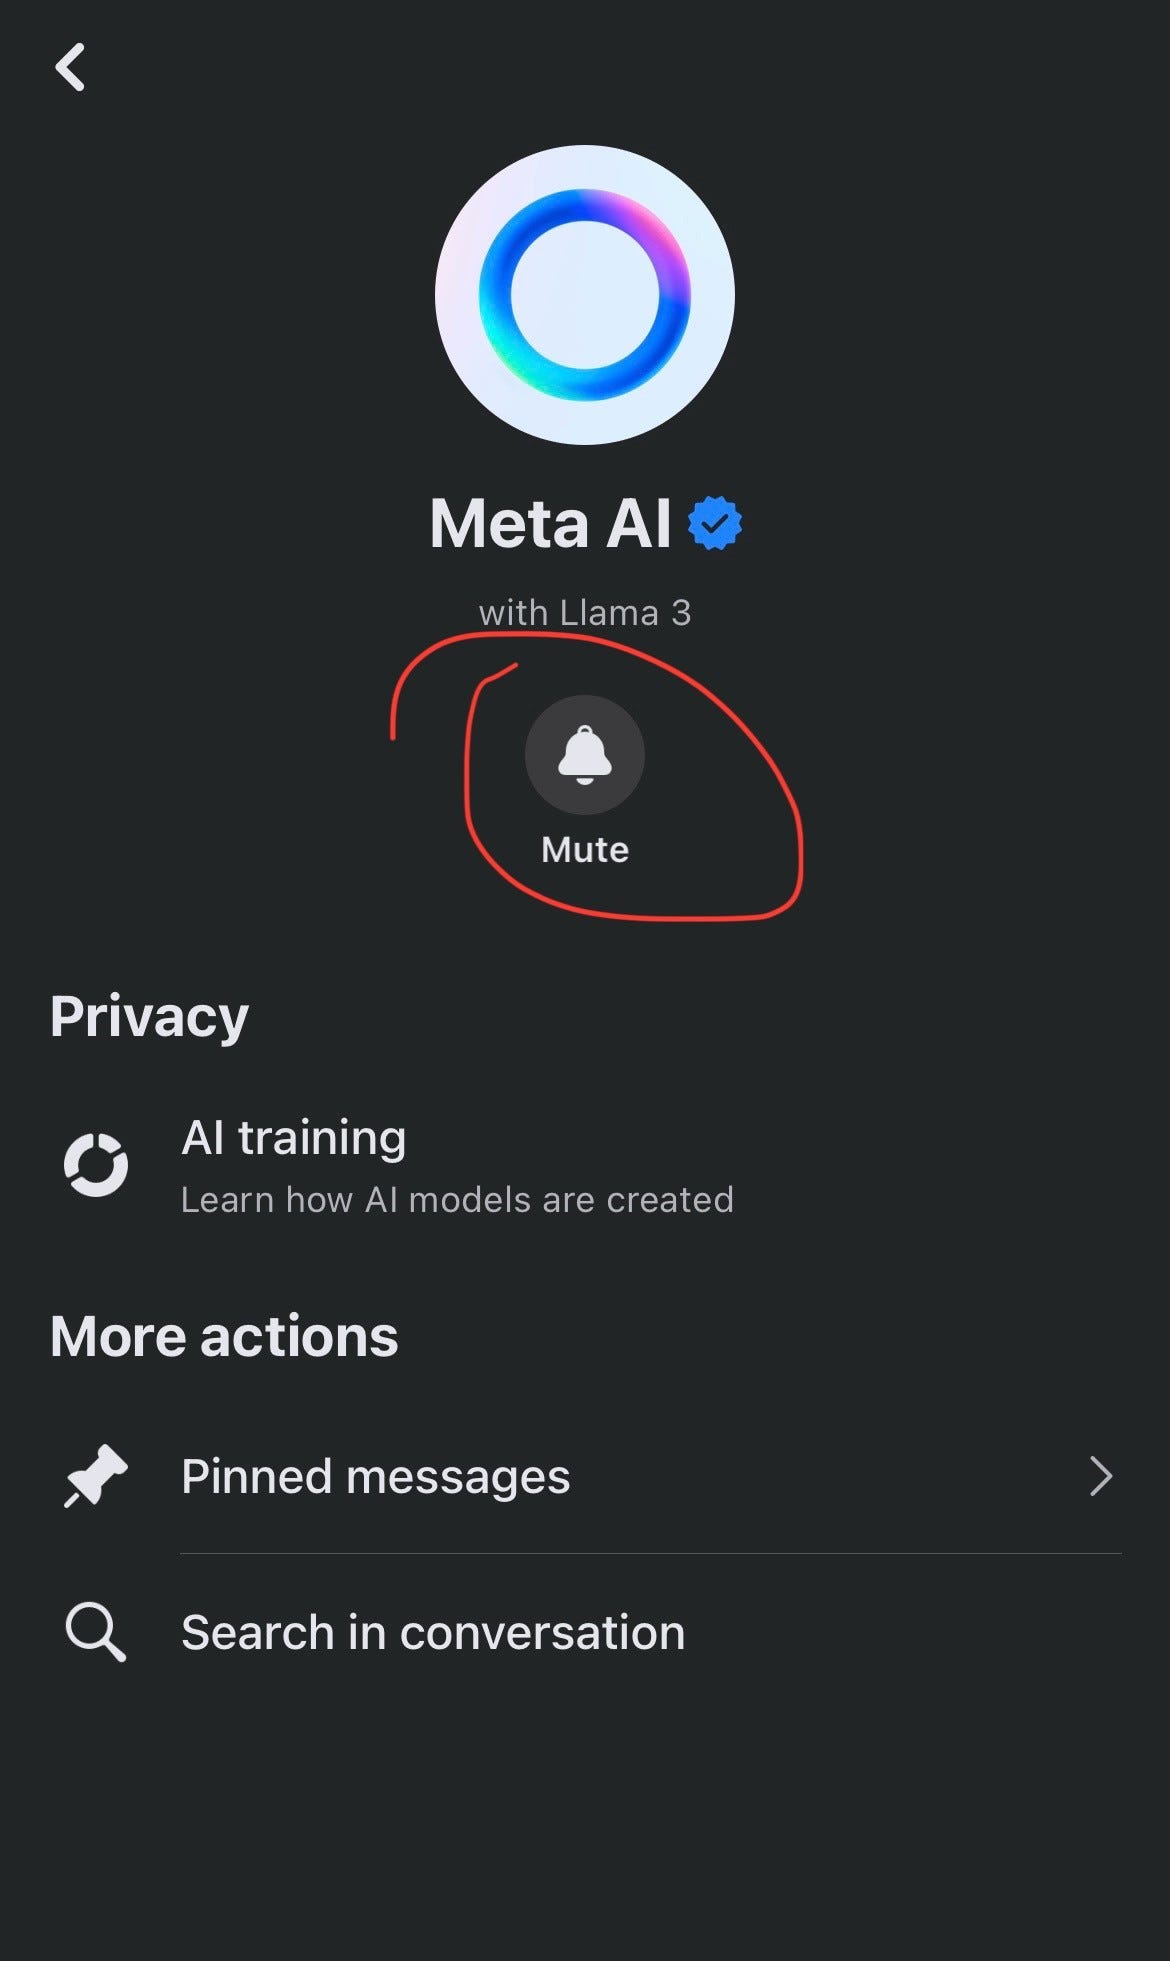 want to turn off the meta ai chat on facebook, instagram? take these easy steps to mute it